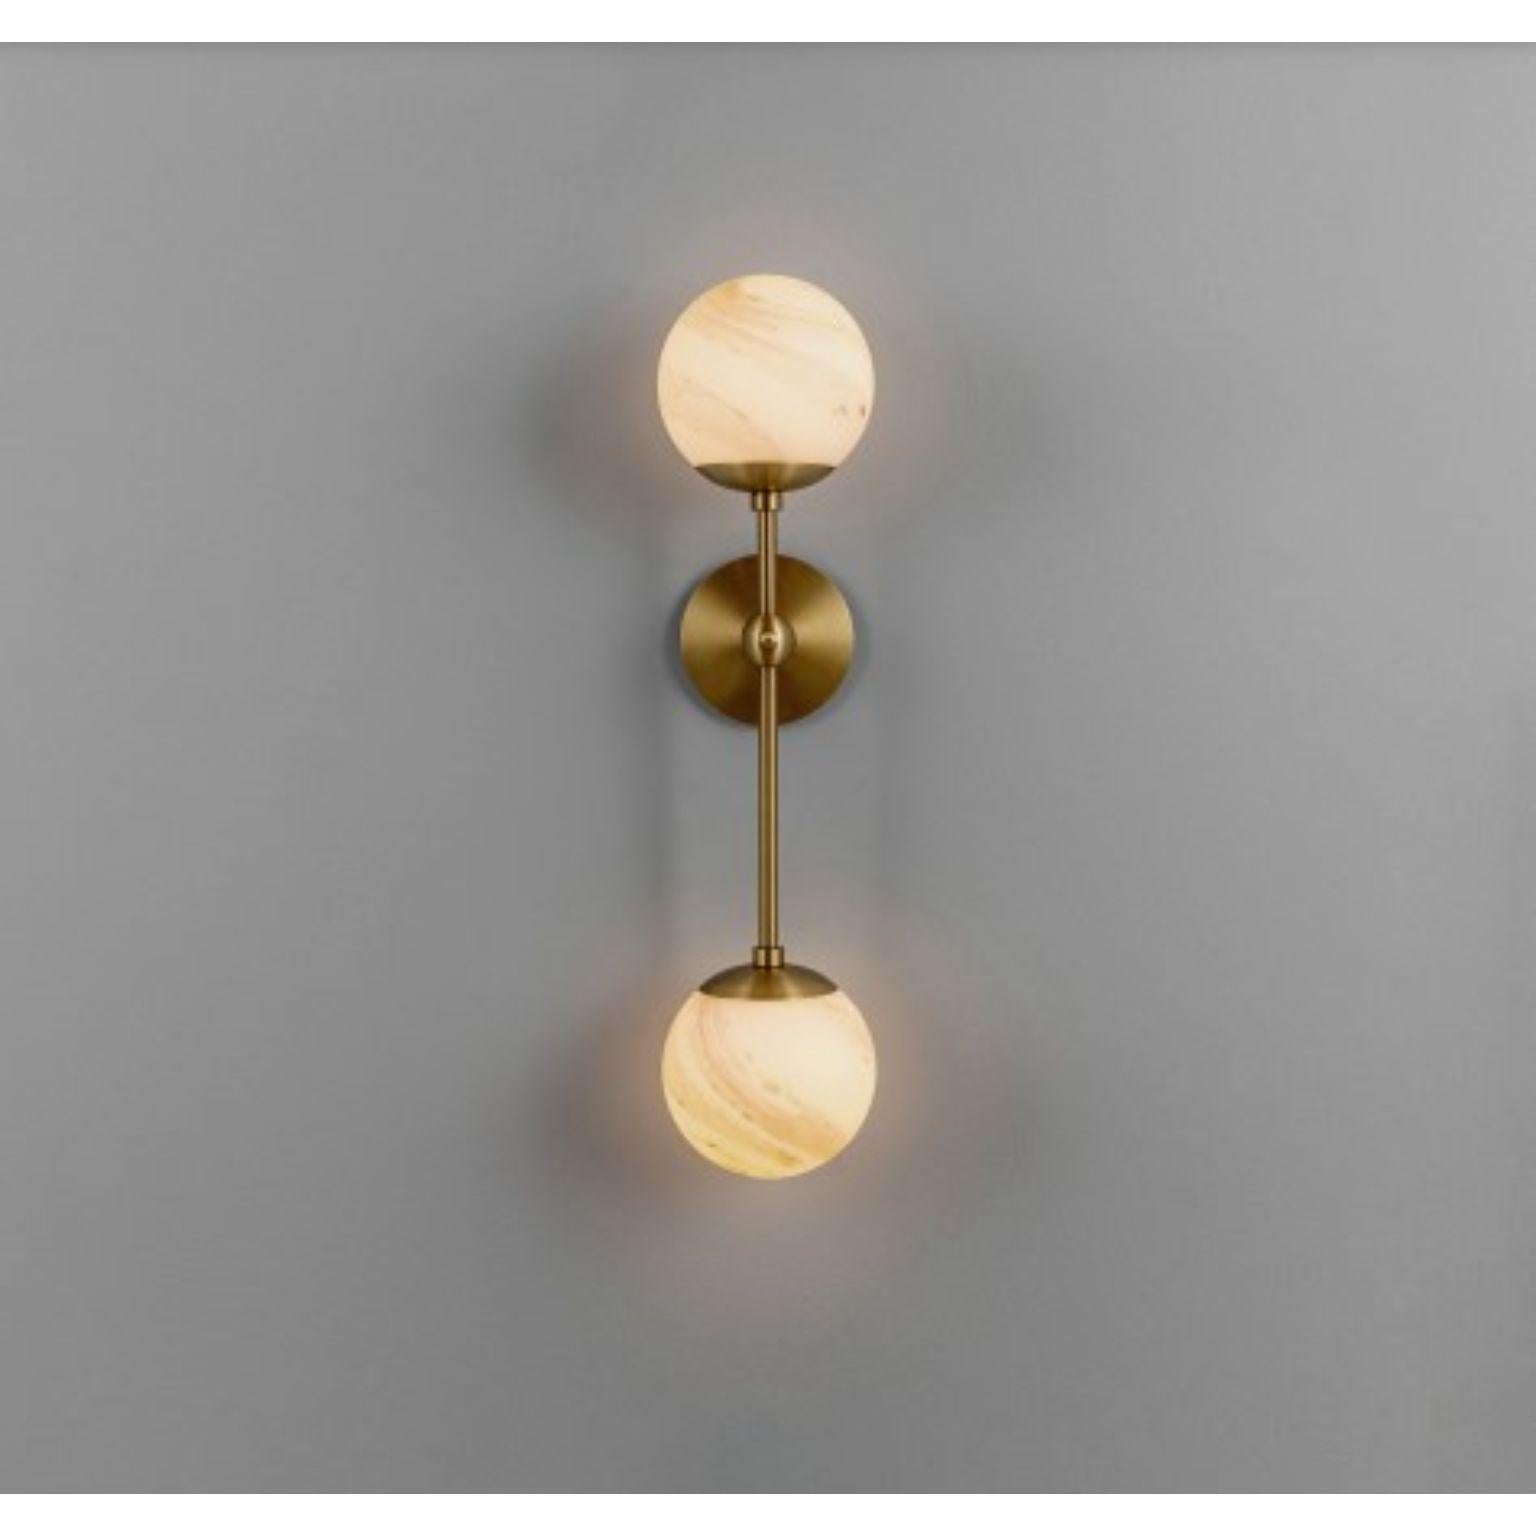 Armstrong Dual wall sconce by Schwung
Dimensions: H 63.7 x W 15 x D 16.9 cm
Materials: Brass, Opal glass
Weight: 2.6 kg

Finishes available: Black gunmetal, polished nickel, brass
Other sizes available.

 Schwung is a german word, and